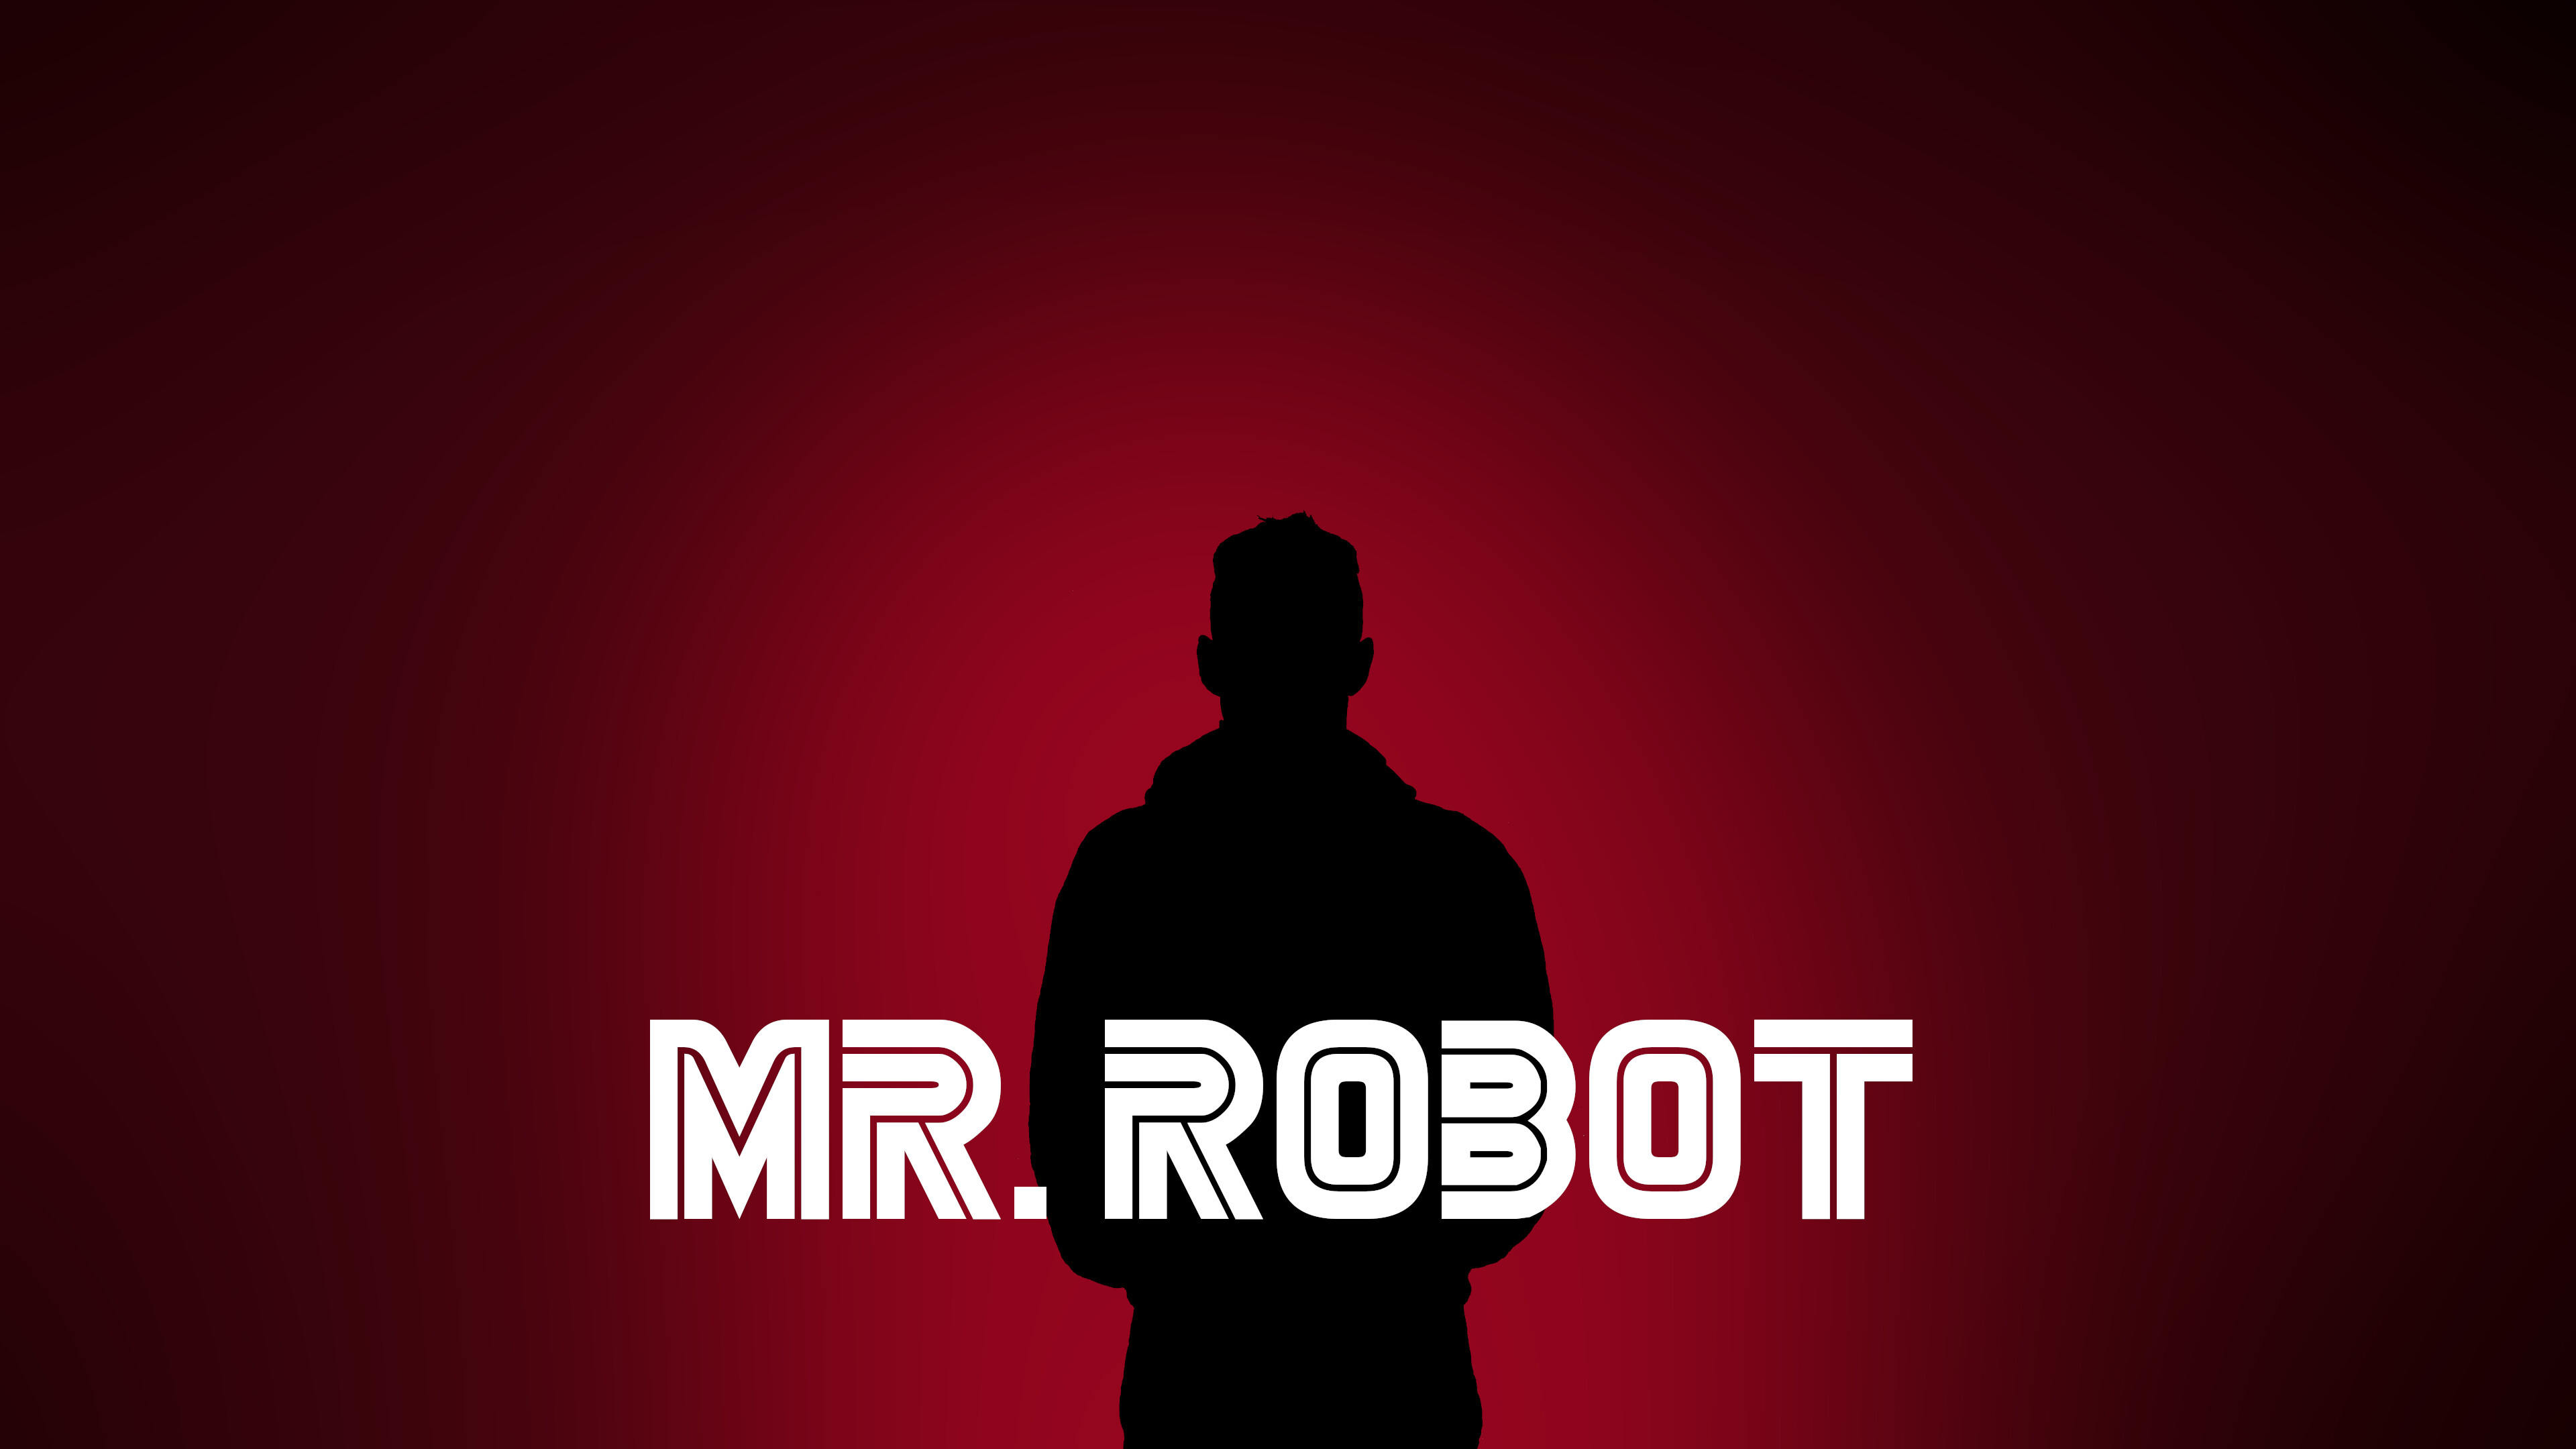 Mr. Robot: The pilot premiered via online and video on demand services on May 27, 2015. 3840x2160 4K Wallpaper.